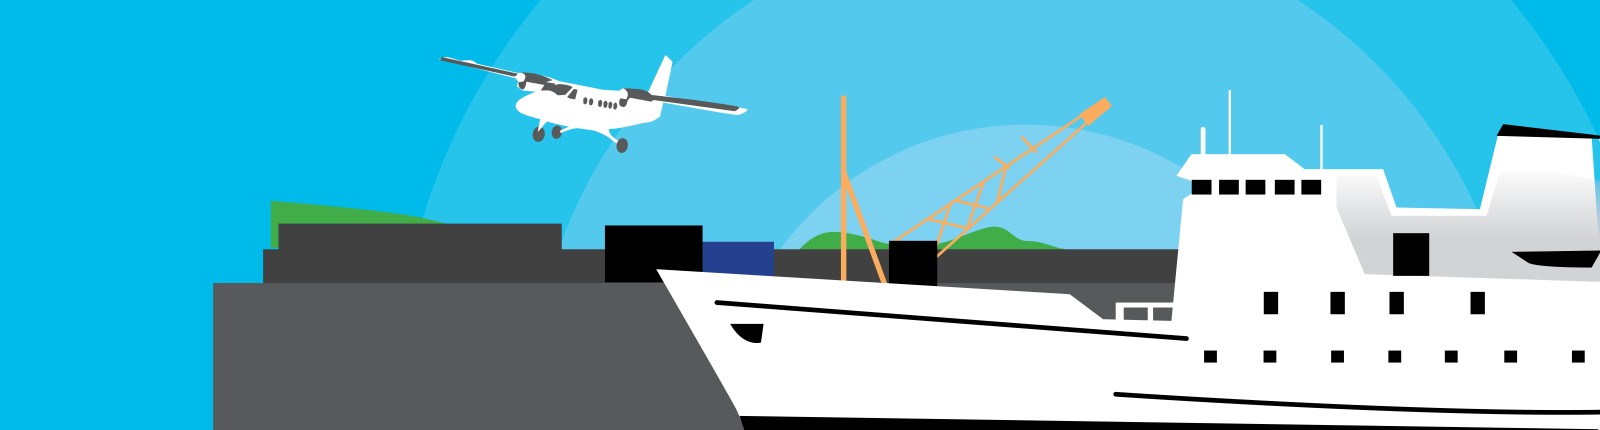 Boat and plane graphic 